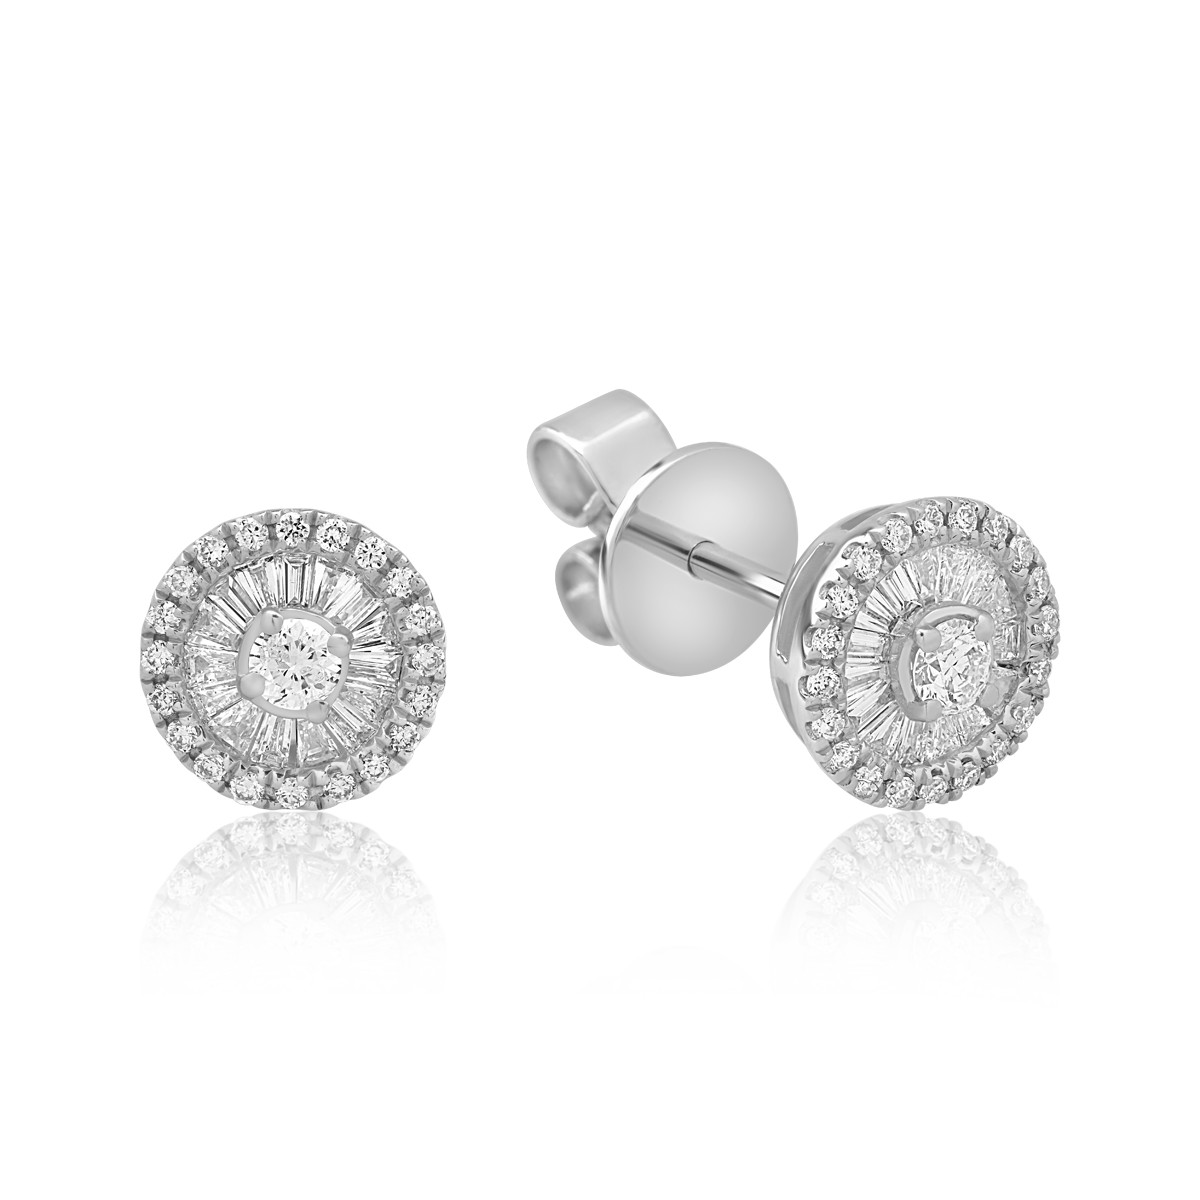 18K white gold earrings with 0.35ct diamonds